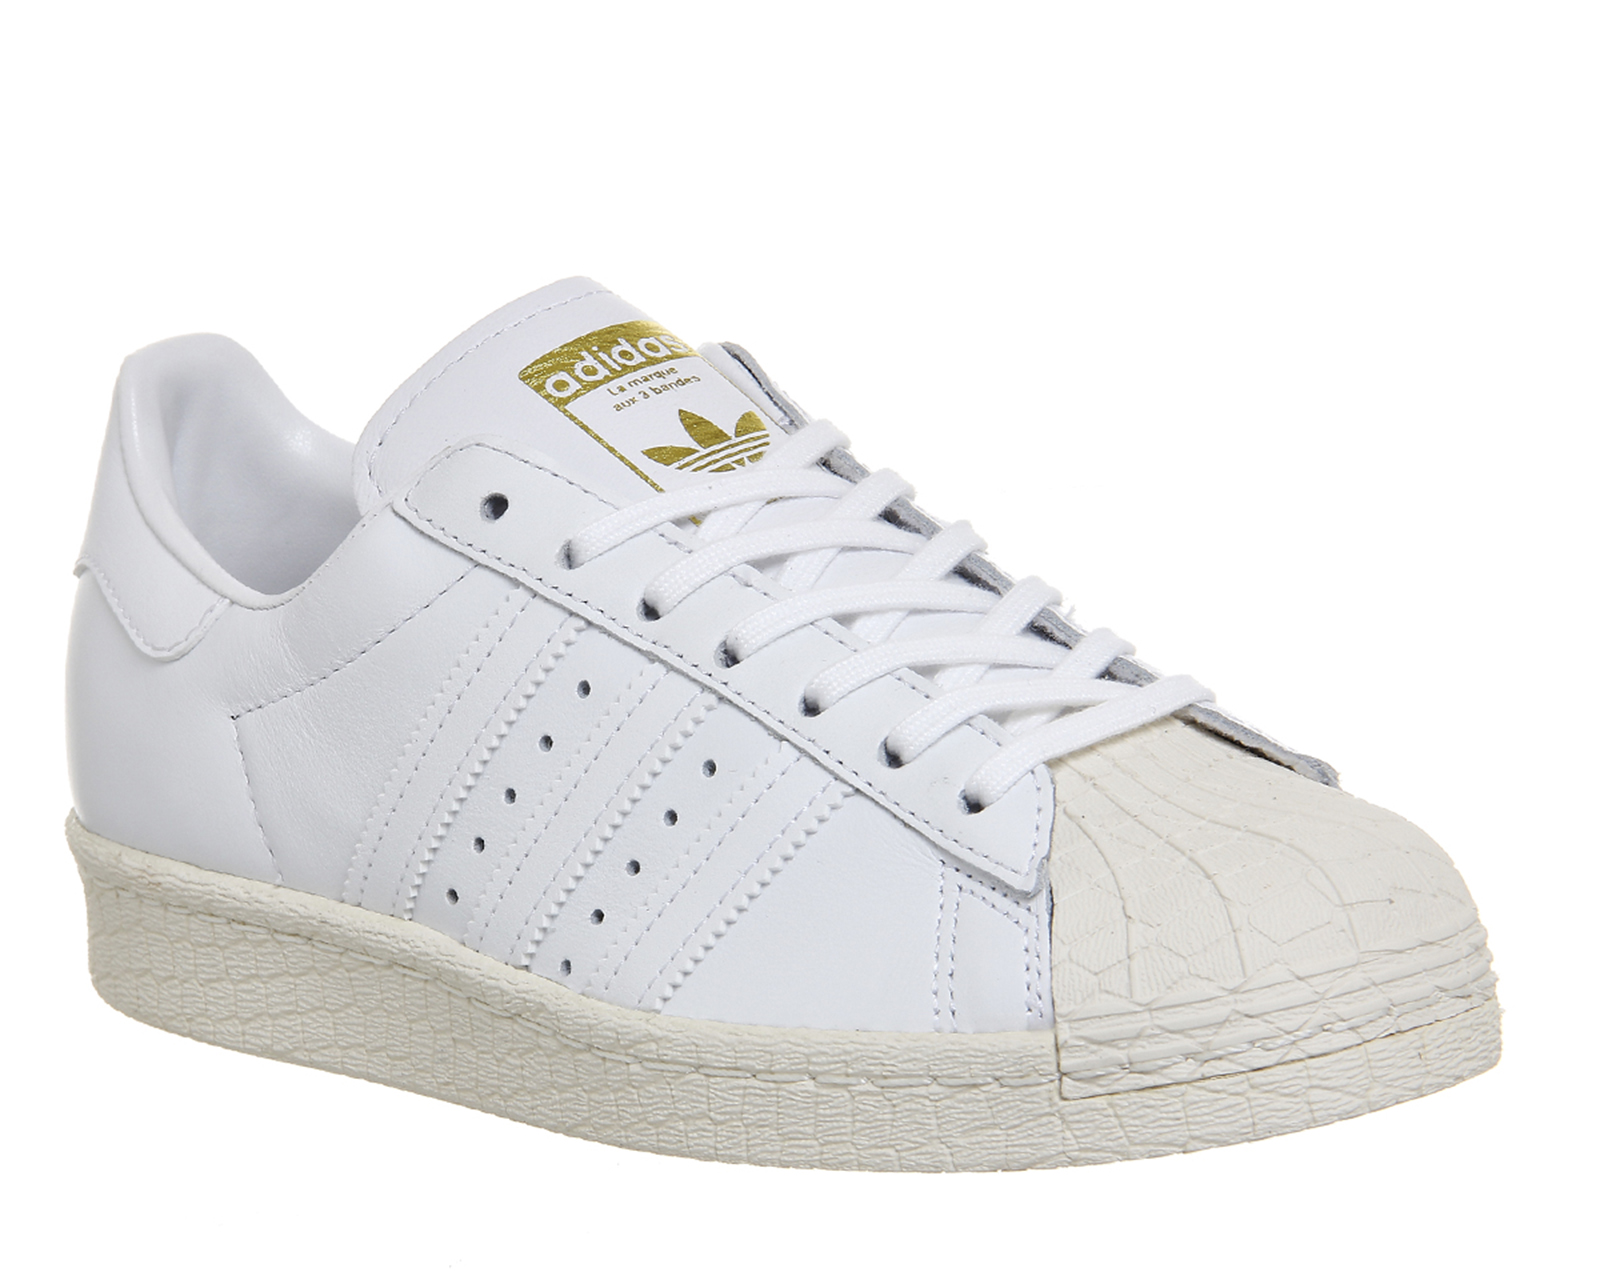 Adidas Superstar 80s White Online Sale, UP TO 60% OFF